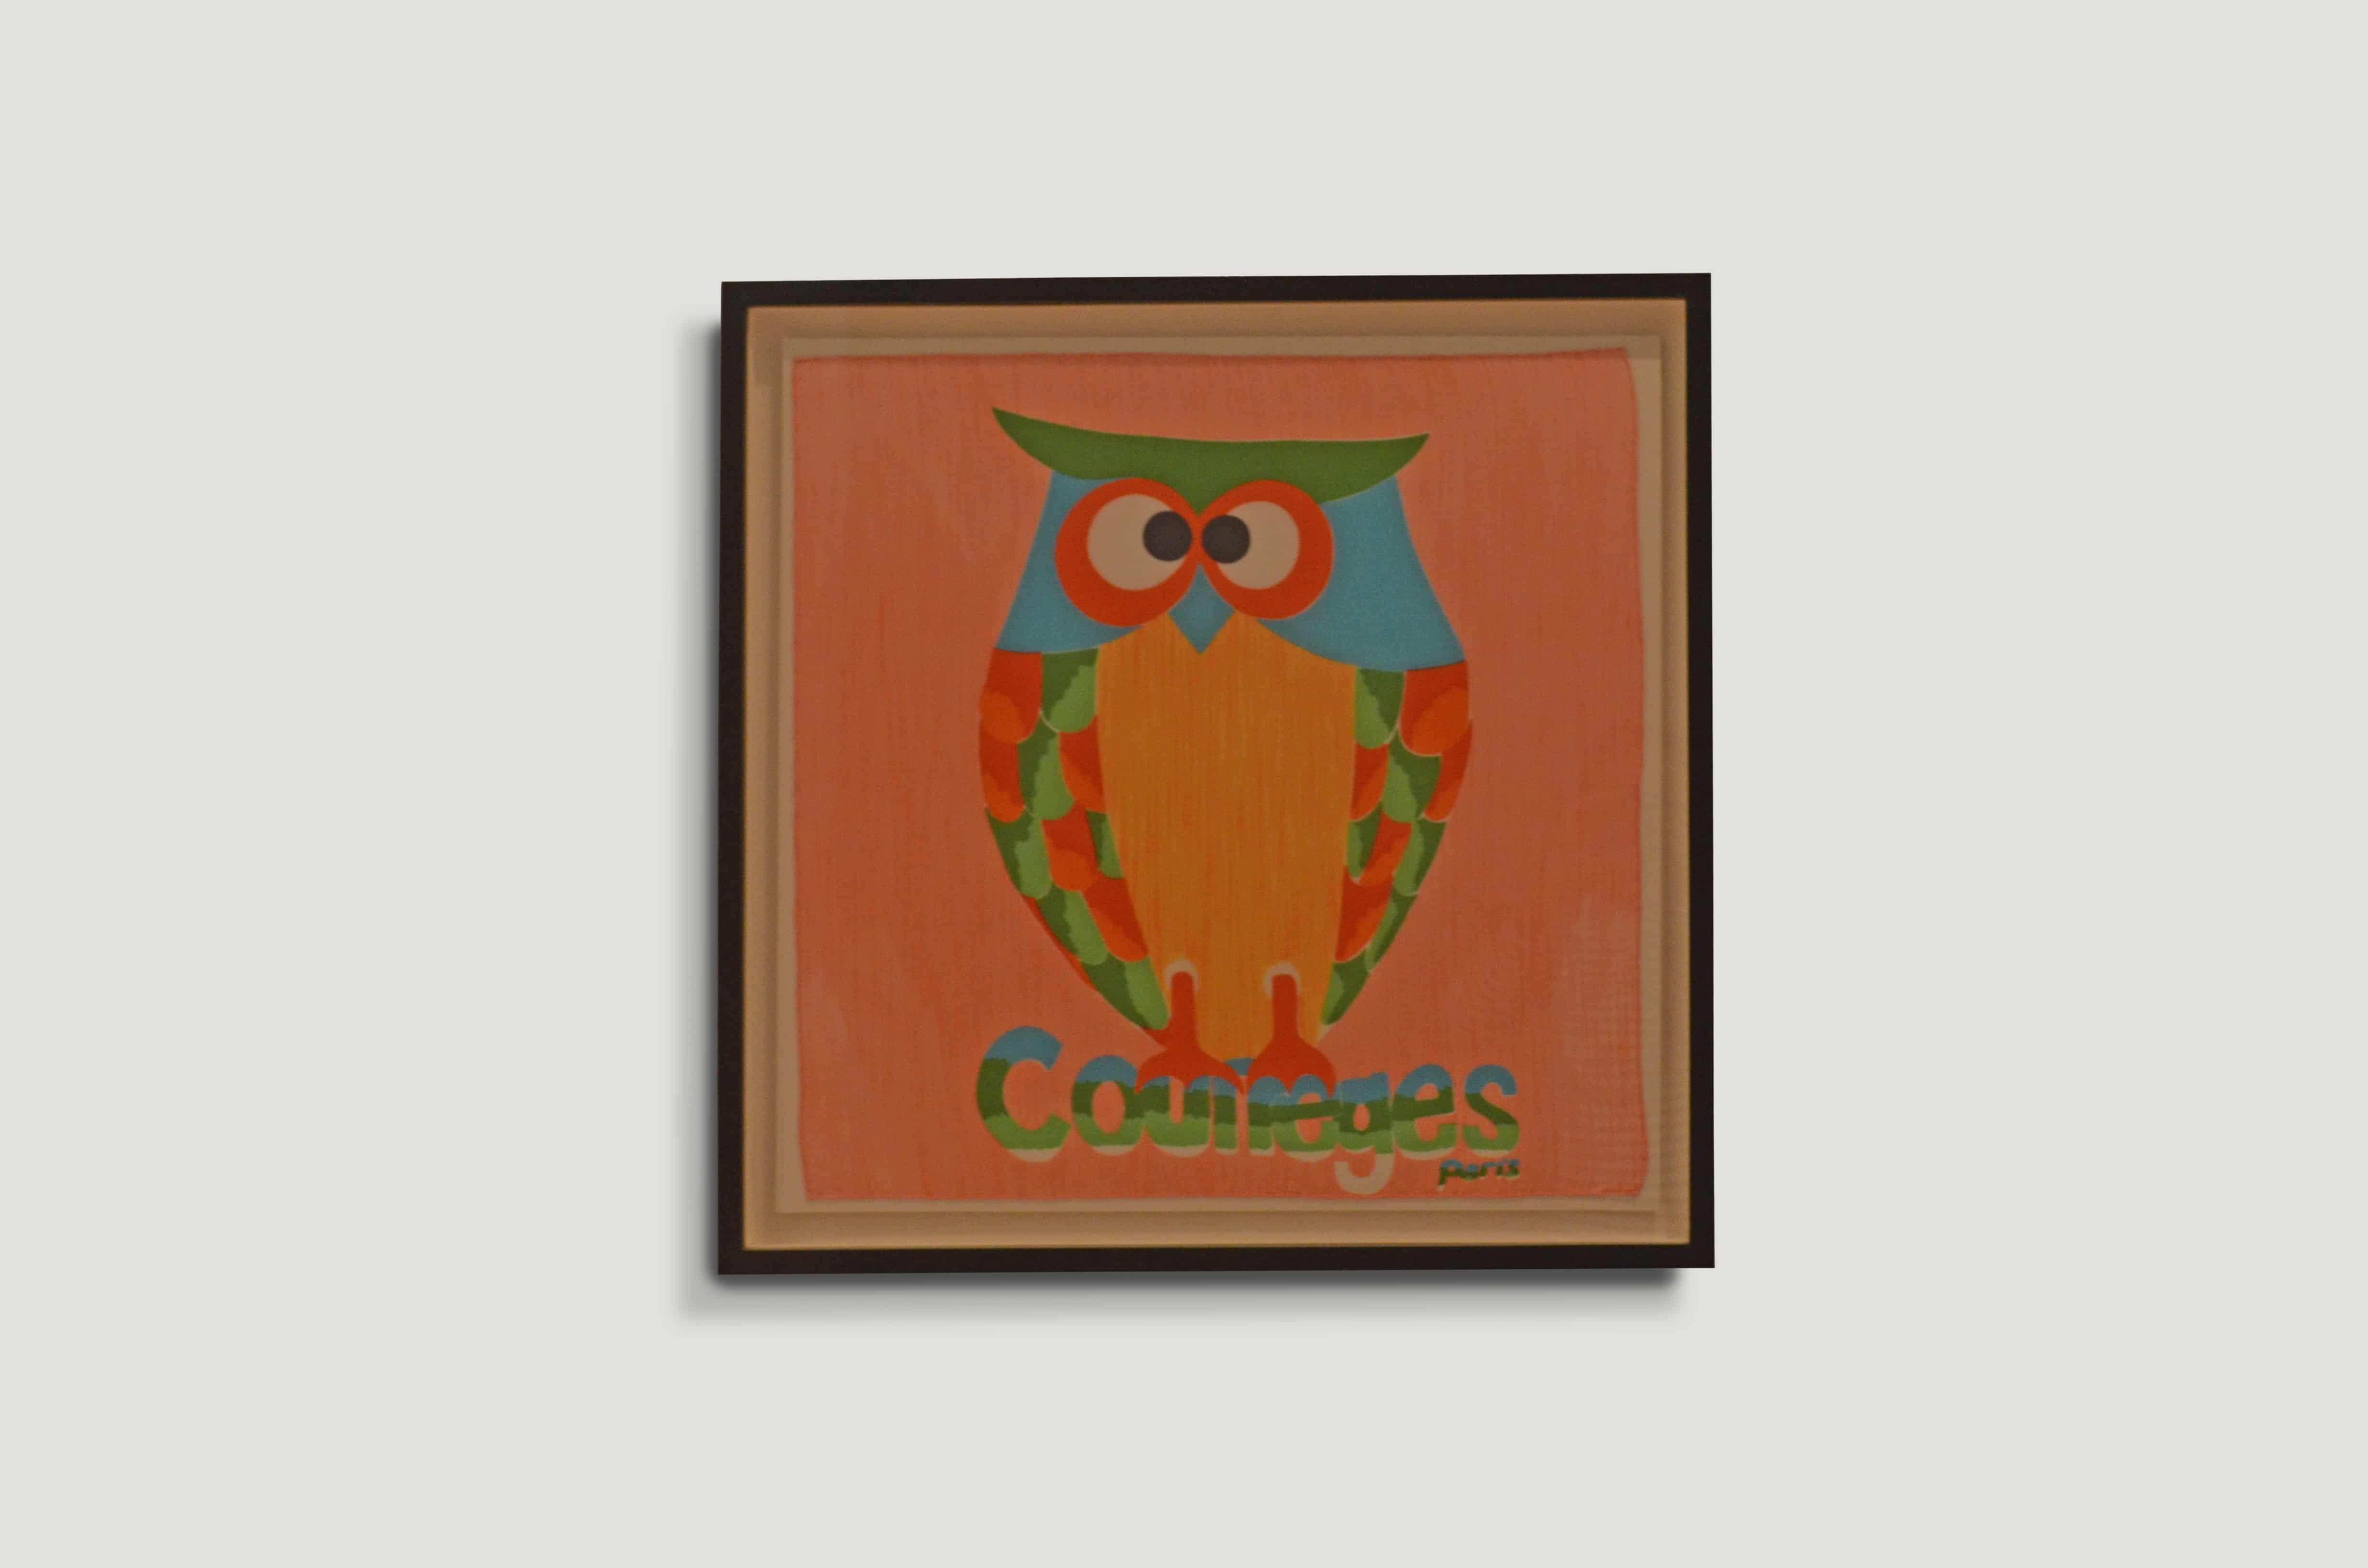 Rare, vintage courrèges scarve in excellent condition, found in Paris. Set in a modern espresso teak wood frame. Limited collection available.

Andrianna Shamaris. The Leader In Modern Organic Design™